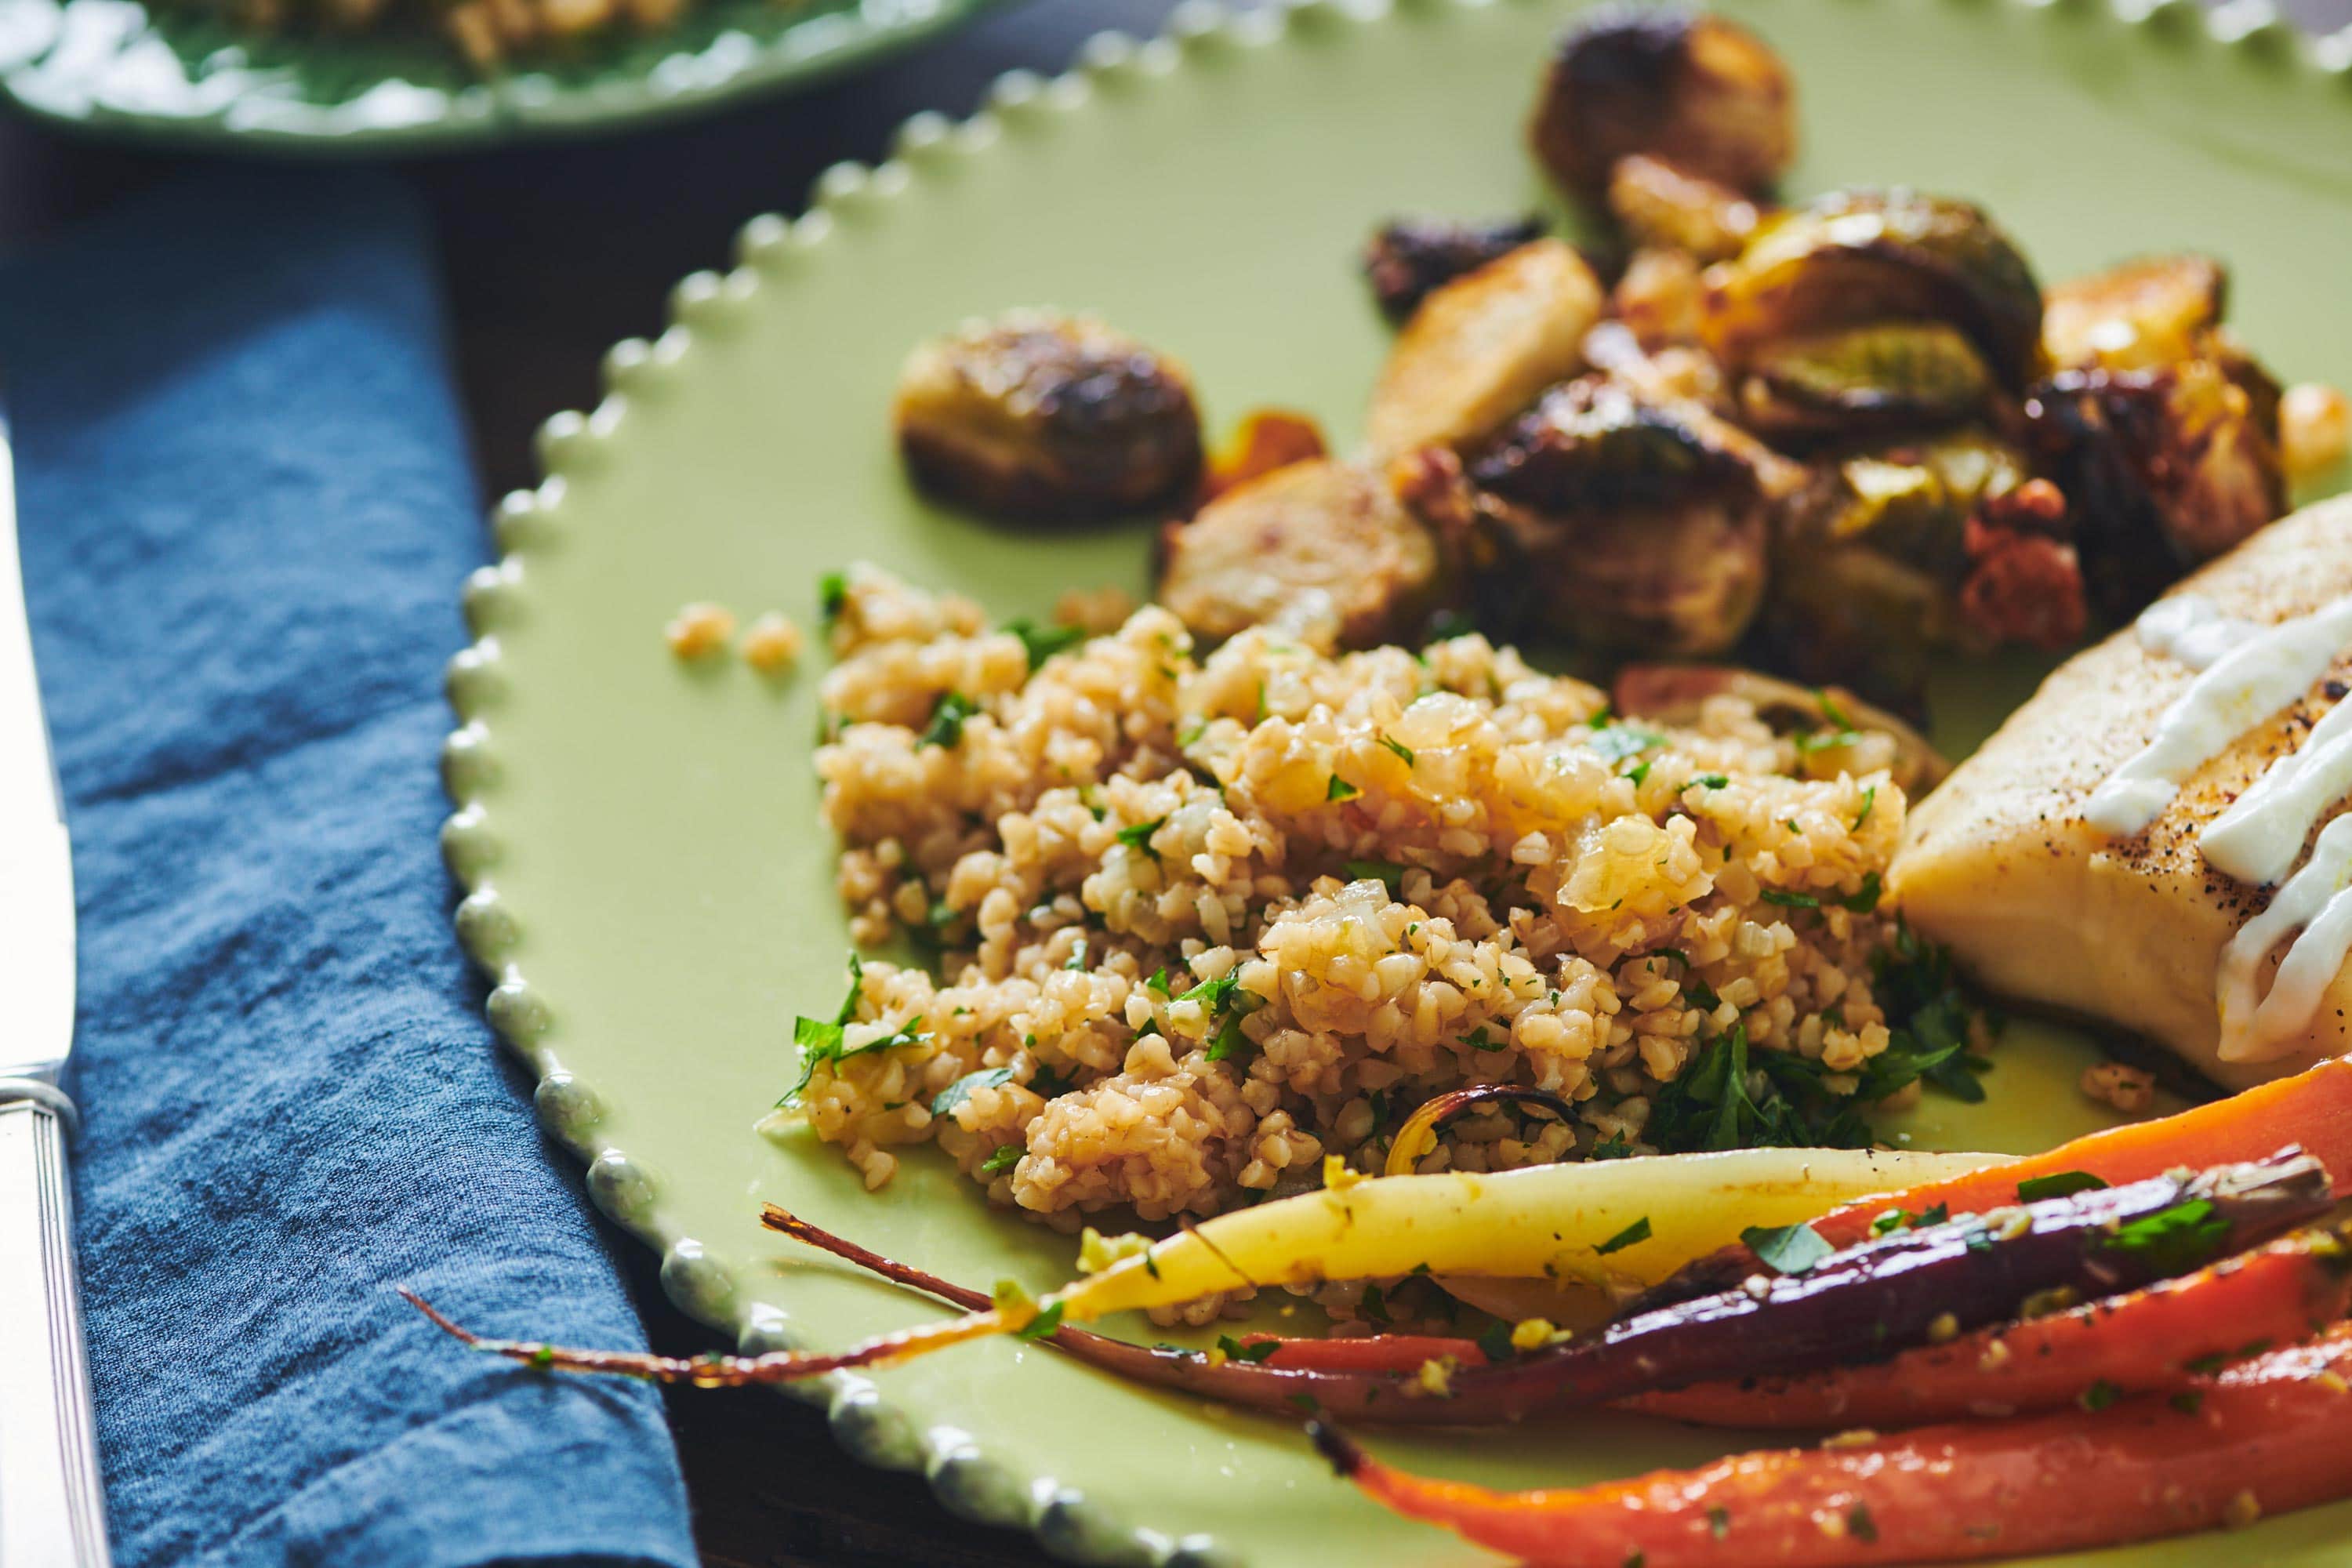 Bulgur Wheat with Caramelized Onions and Parsley, rainbow carrots, and brussels sprouts on a plate.